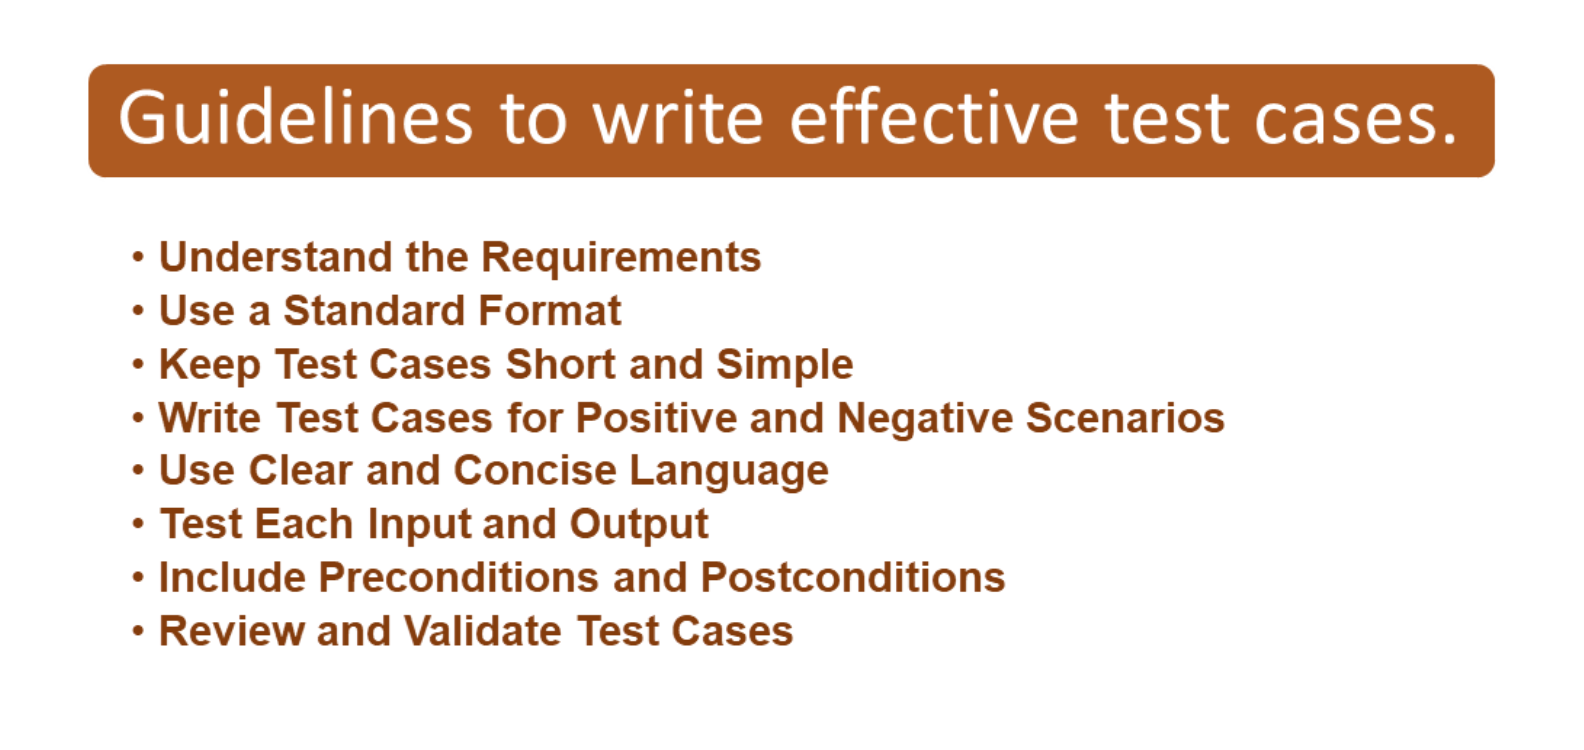 Guideline to write effective test cases